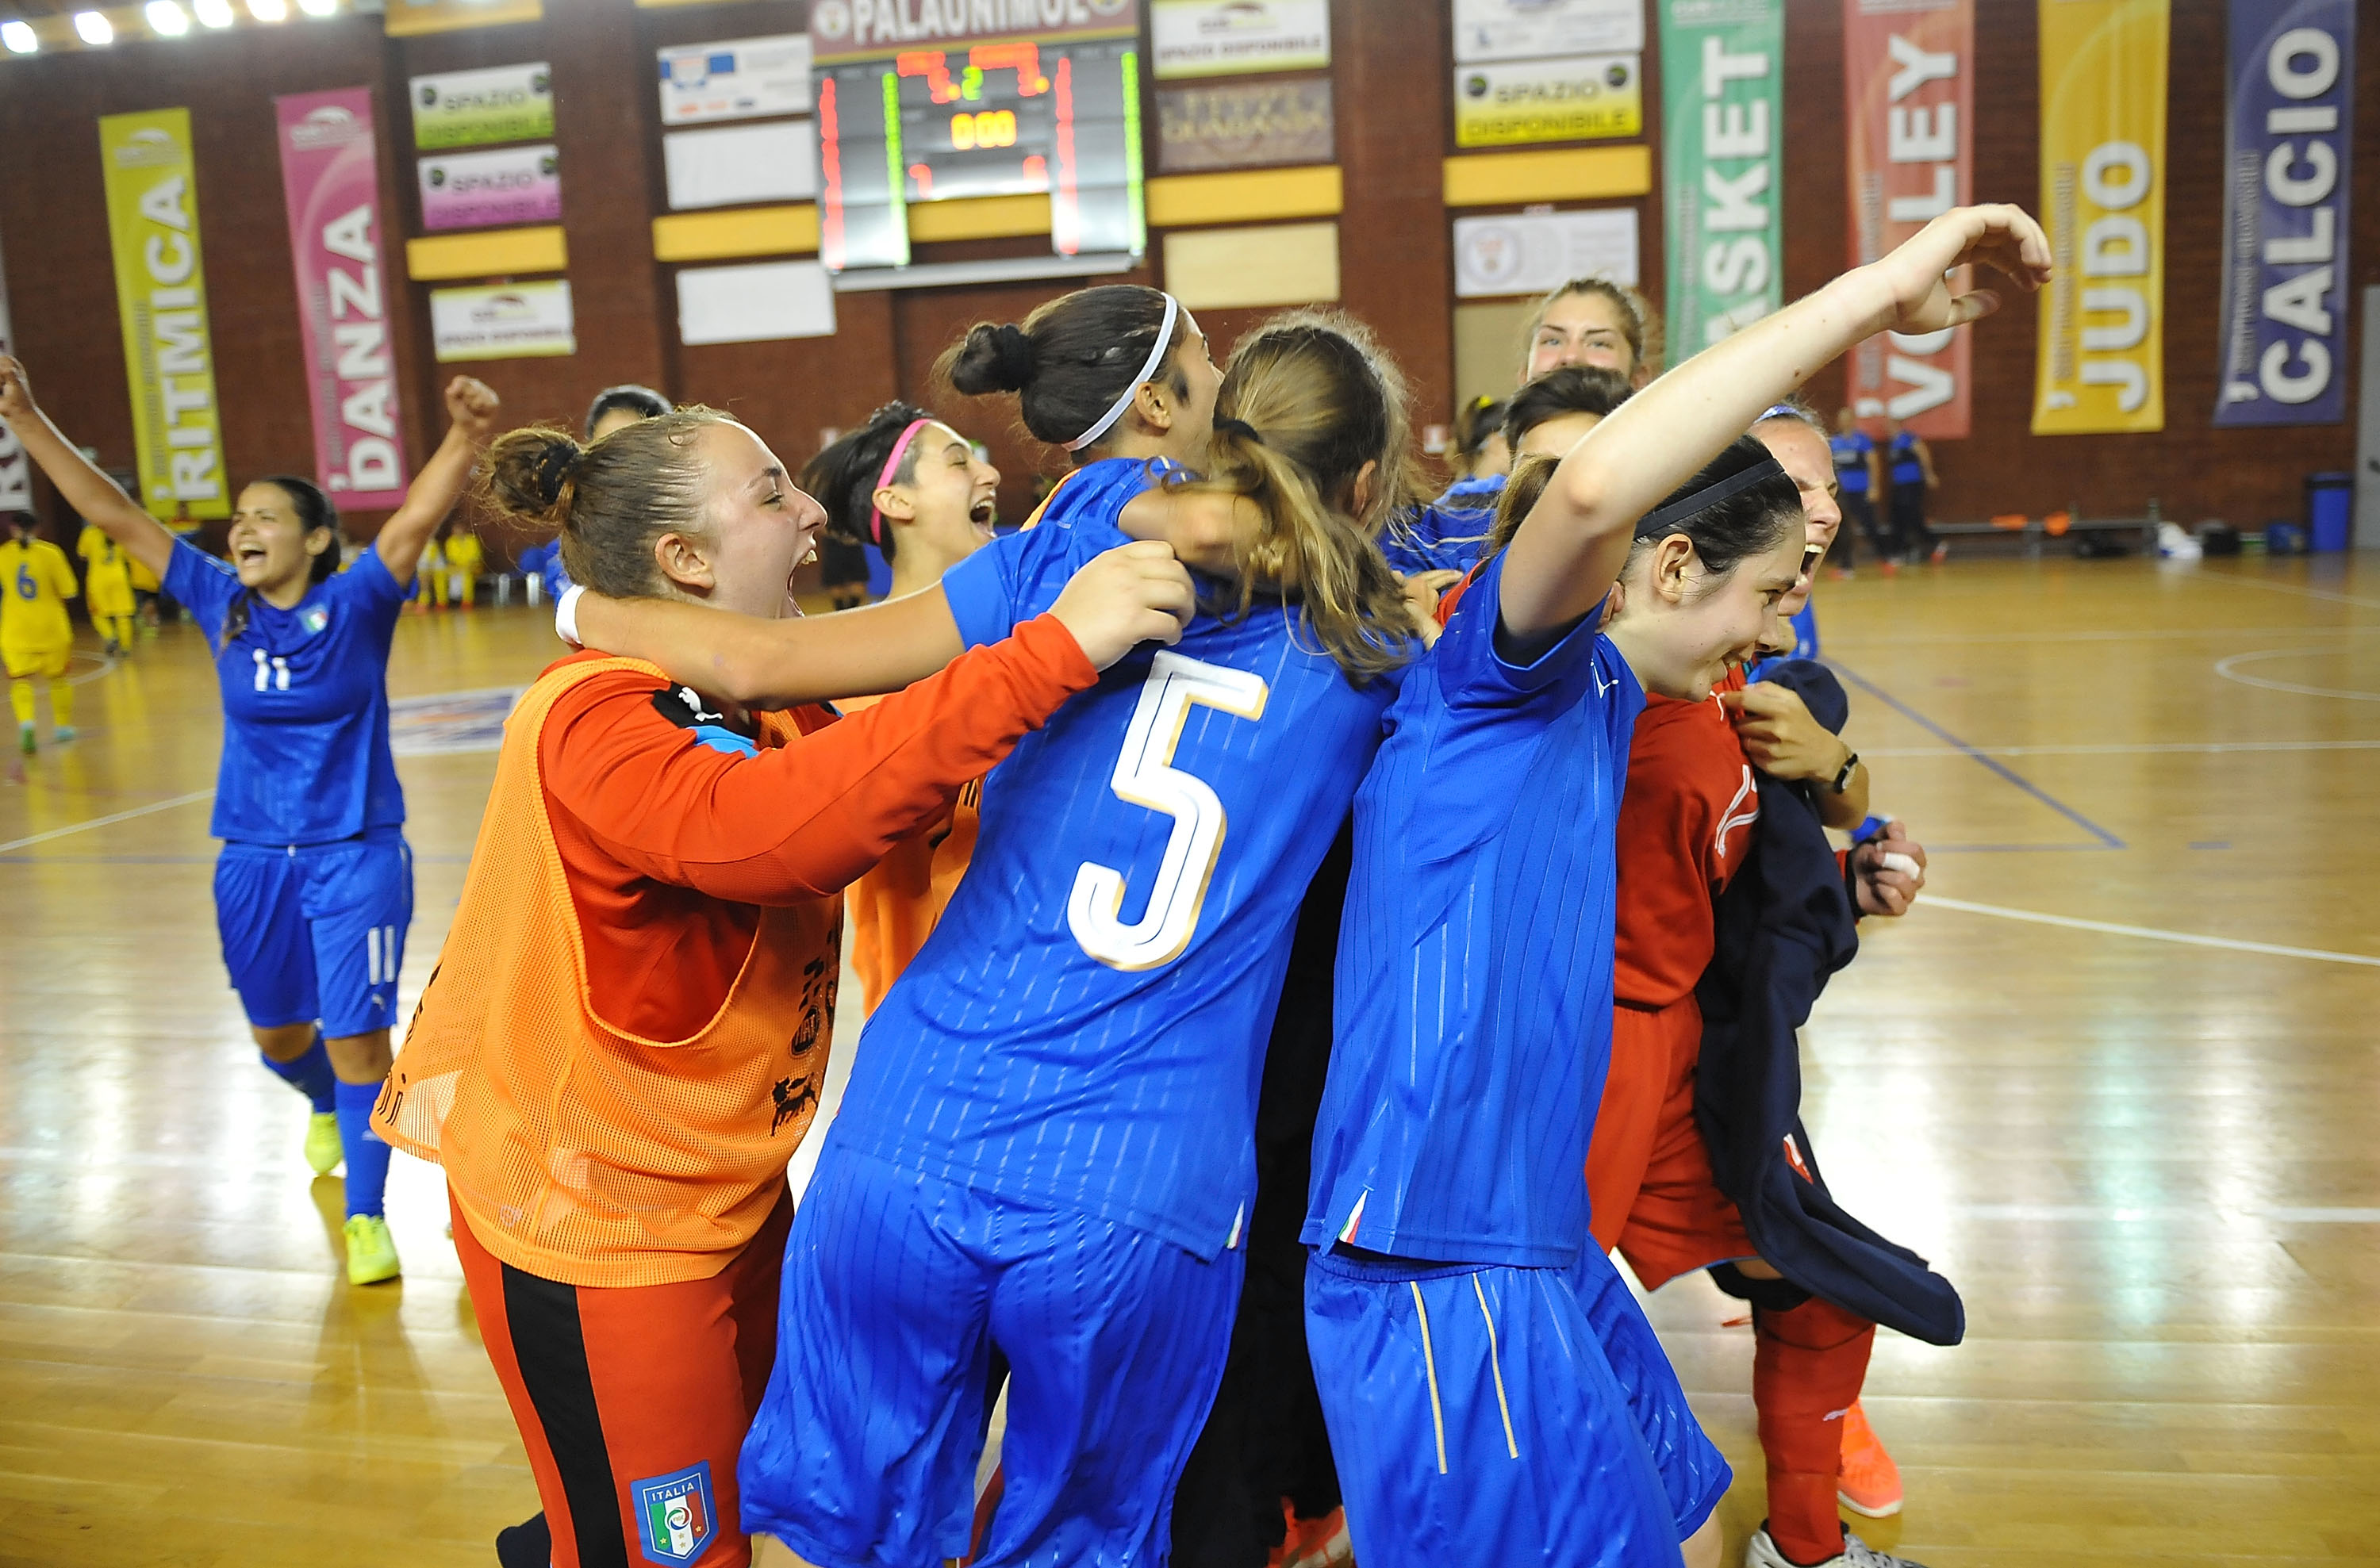 CAMPOBASSO, ITALY - JUNE 23:  Players of Italy celebrate the victory after the U17 Women Futsal Tournament match between Italy and Romania on June 23, 2017 in Campobasso, Italy.  (Photo by Francesco Pecoraro/Getty Images)